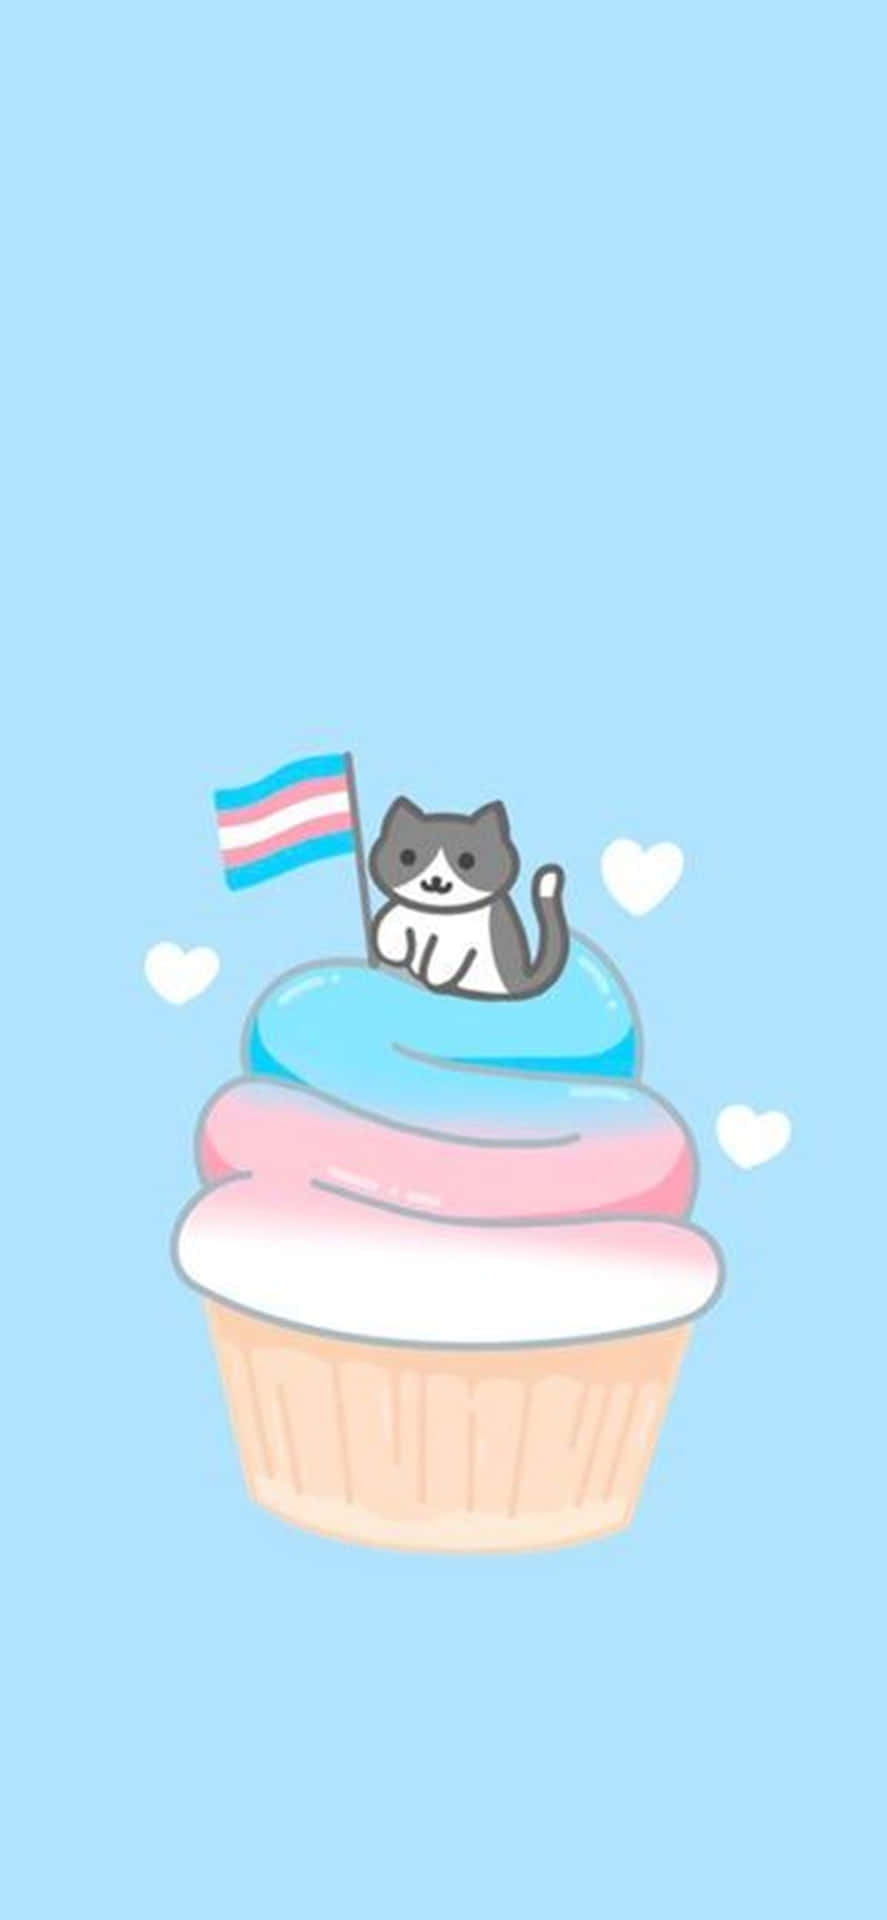 Cat On A Muffin Trans Phone Wallpaper